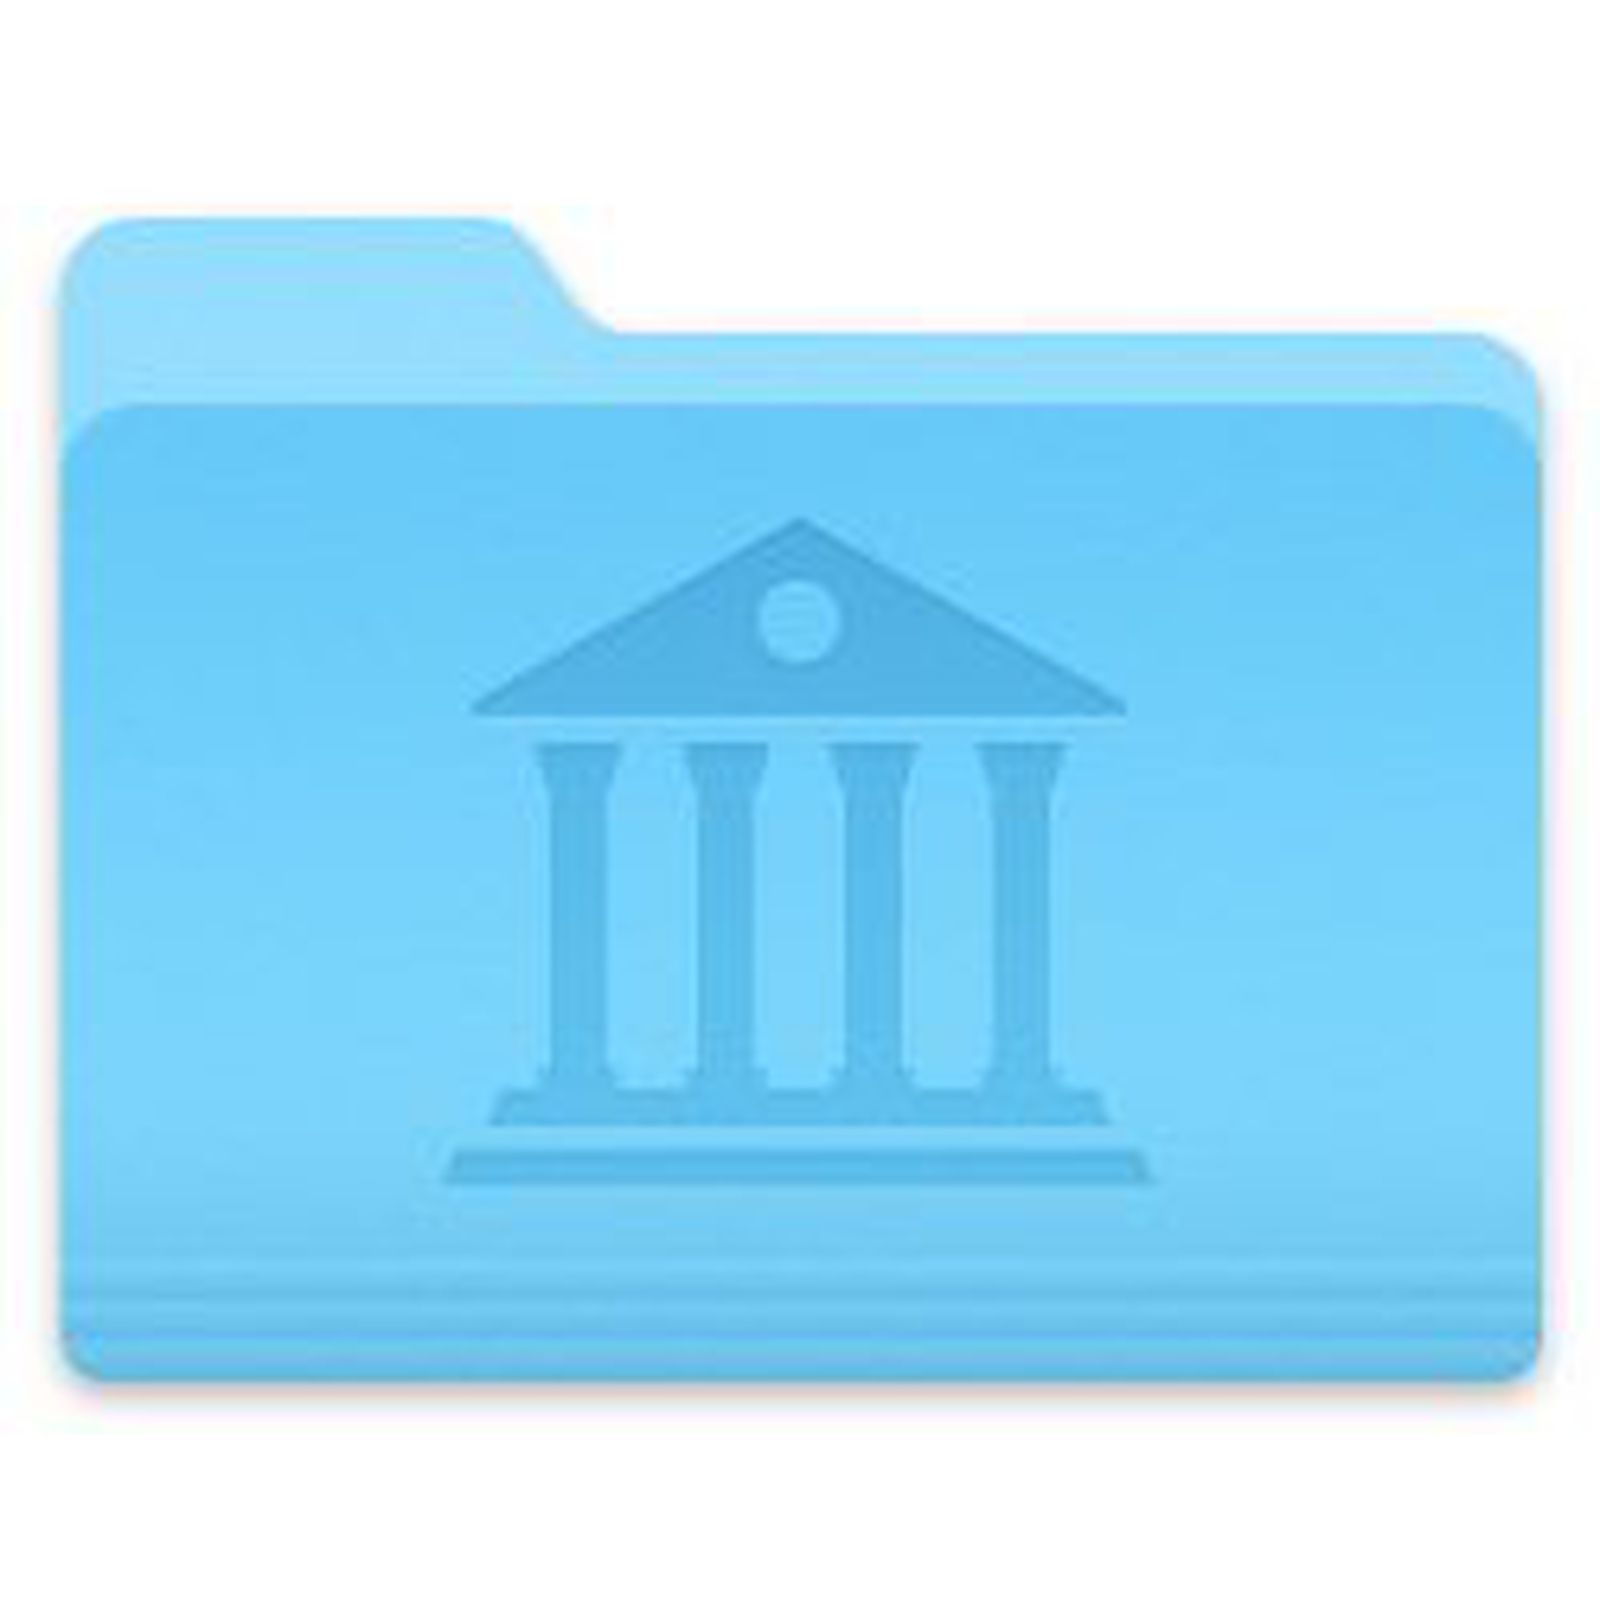 cannot drag and drop to library folder on mac